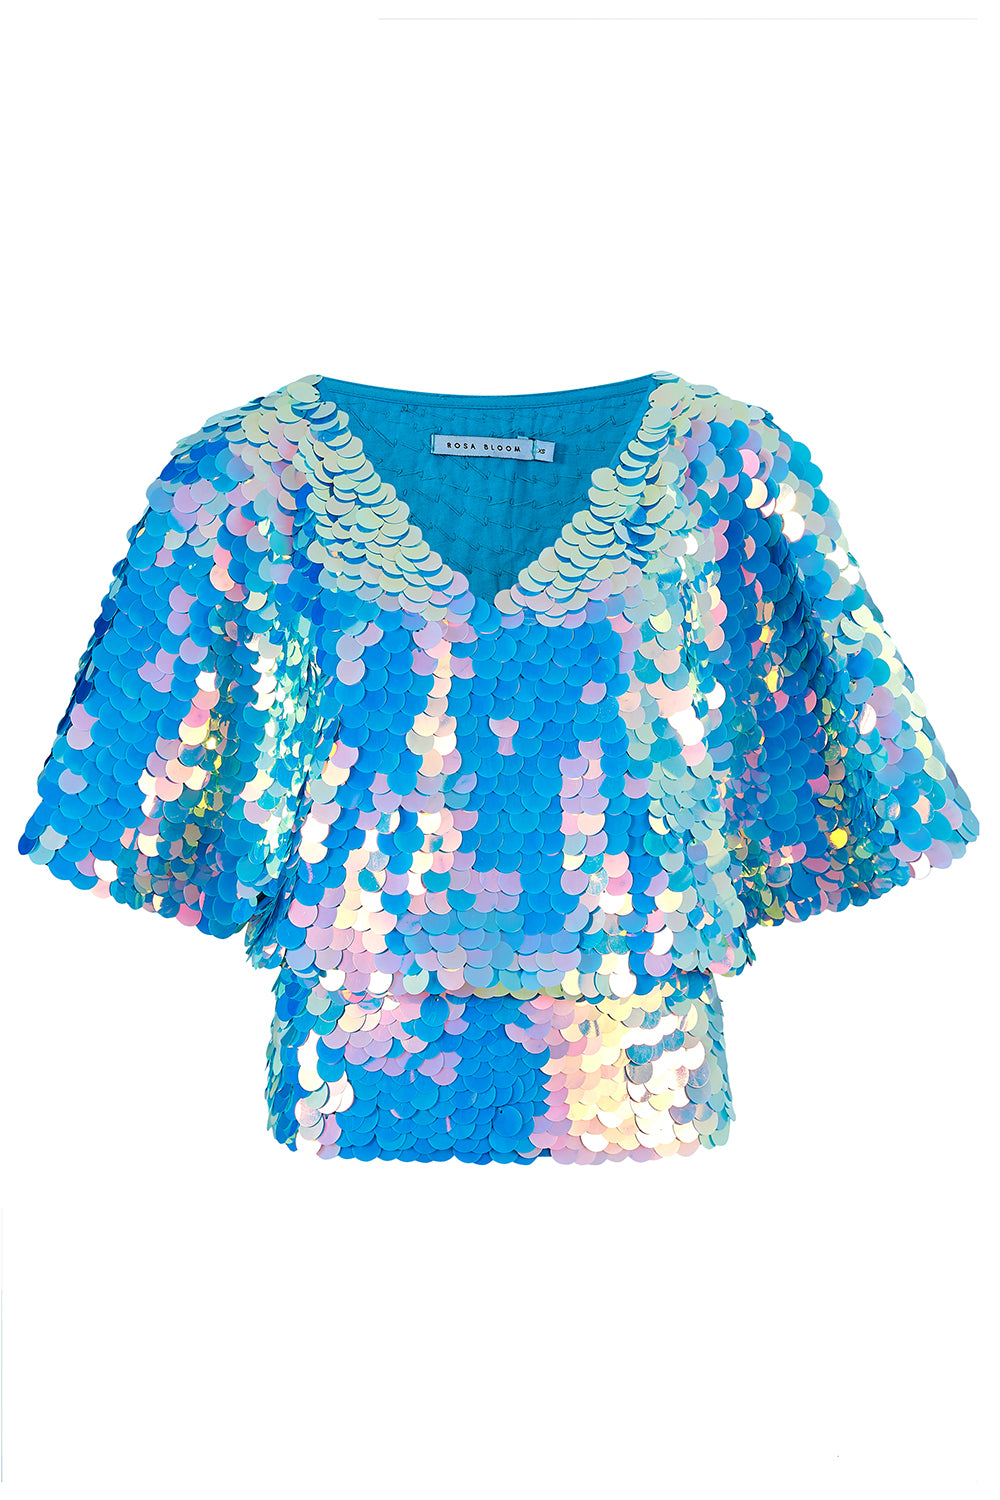 Florence Cape top in Moonrise